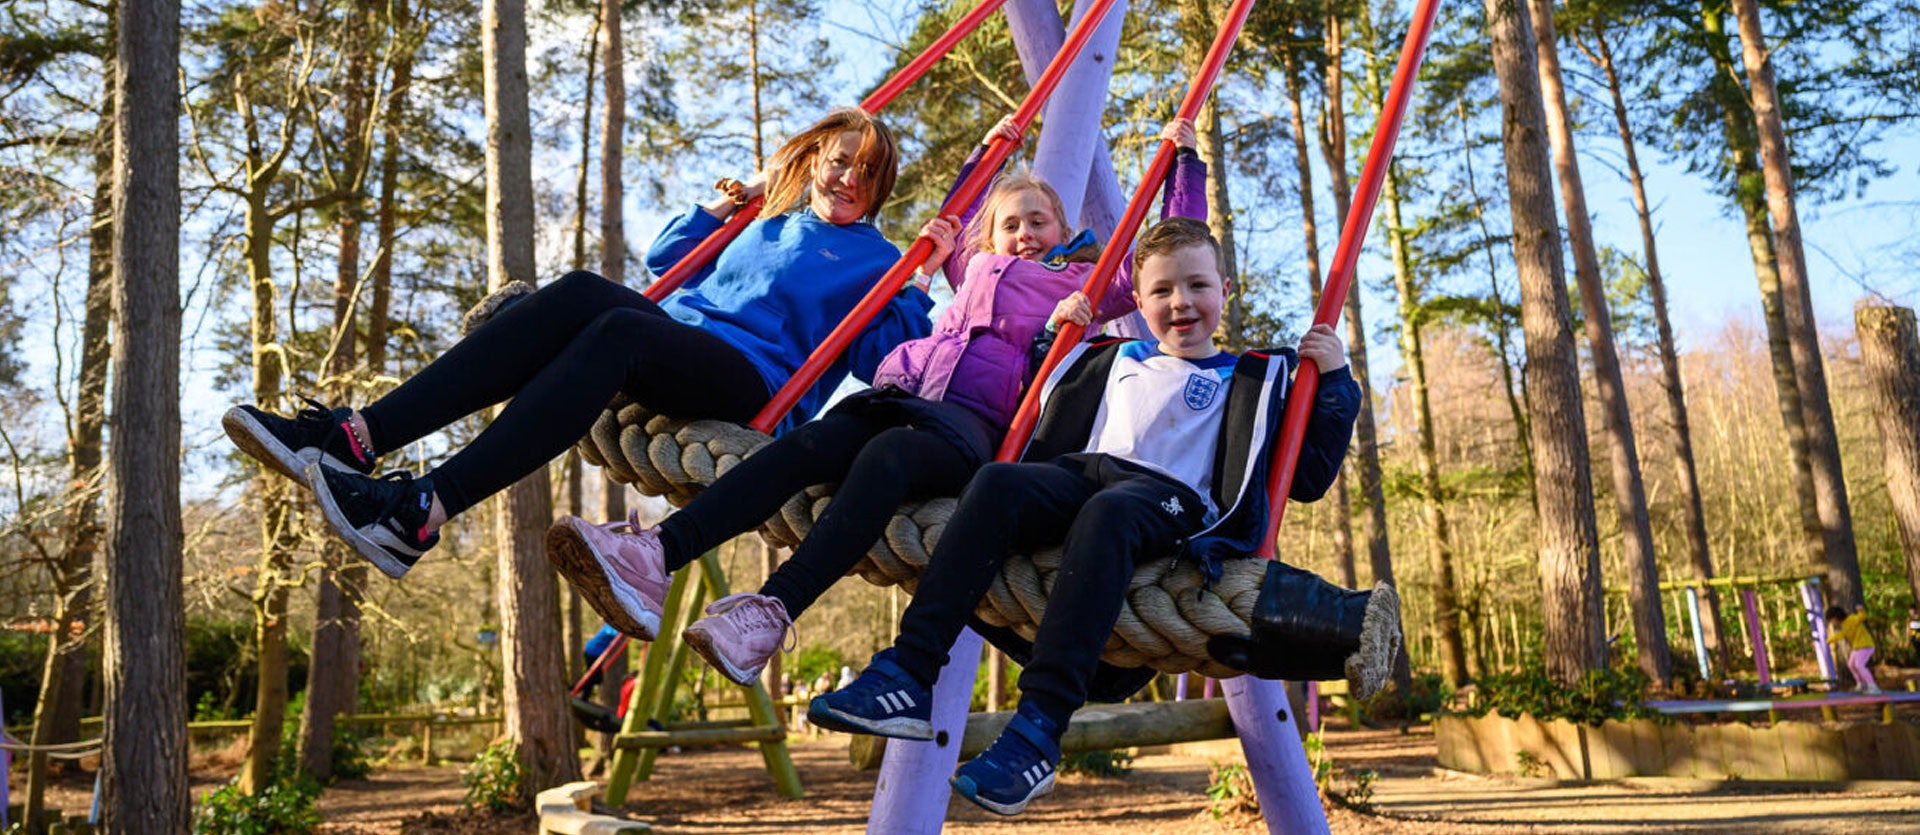 Buy one get one free at BeWILDerwood Cheshire this February